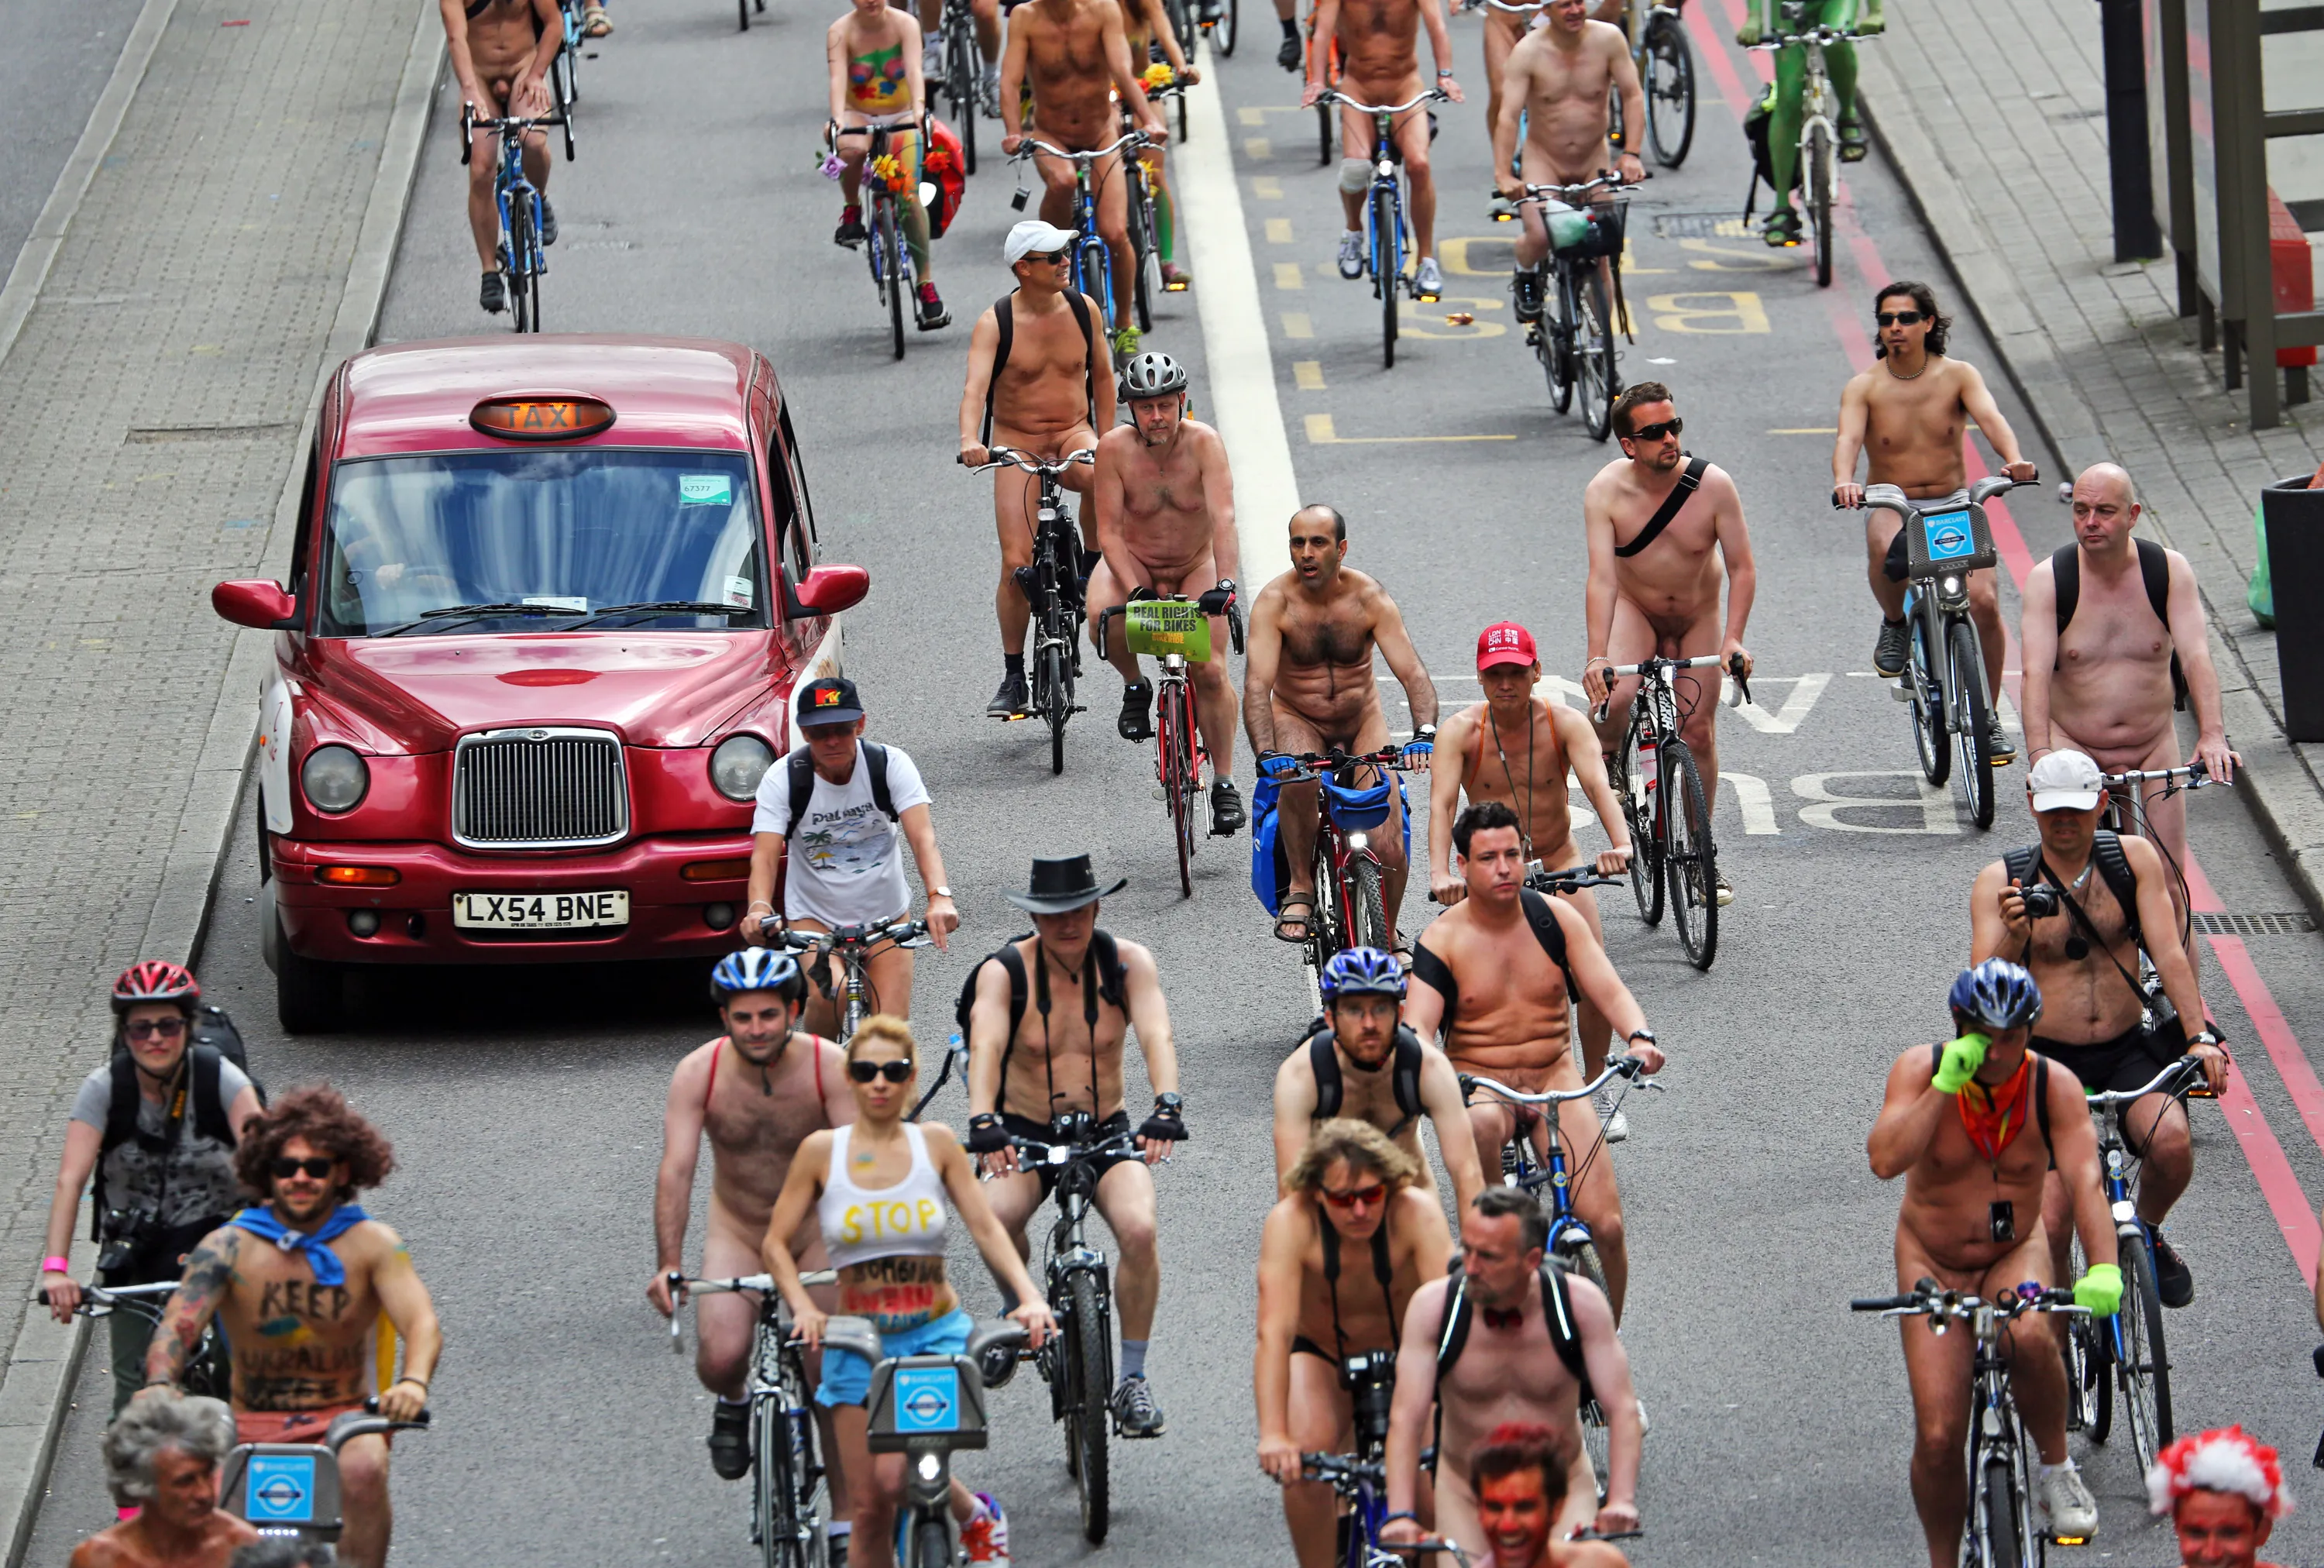 Cyclists Bare All For World Naked Bike Ride Through Clapham